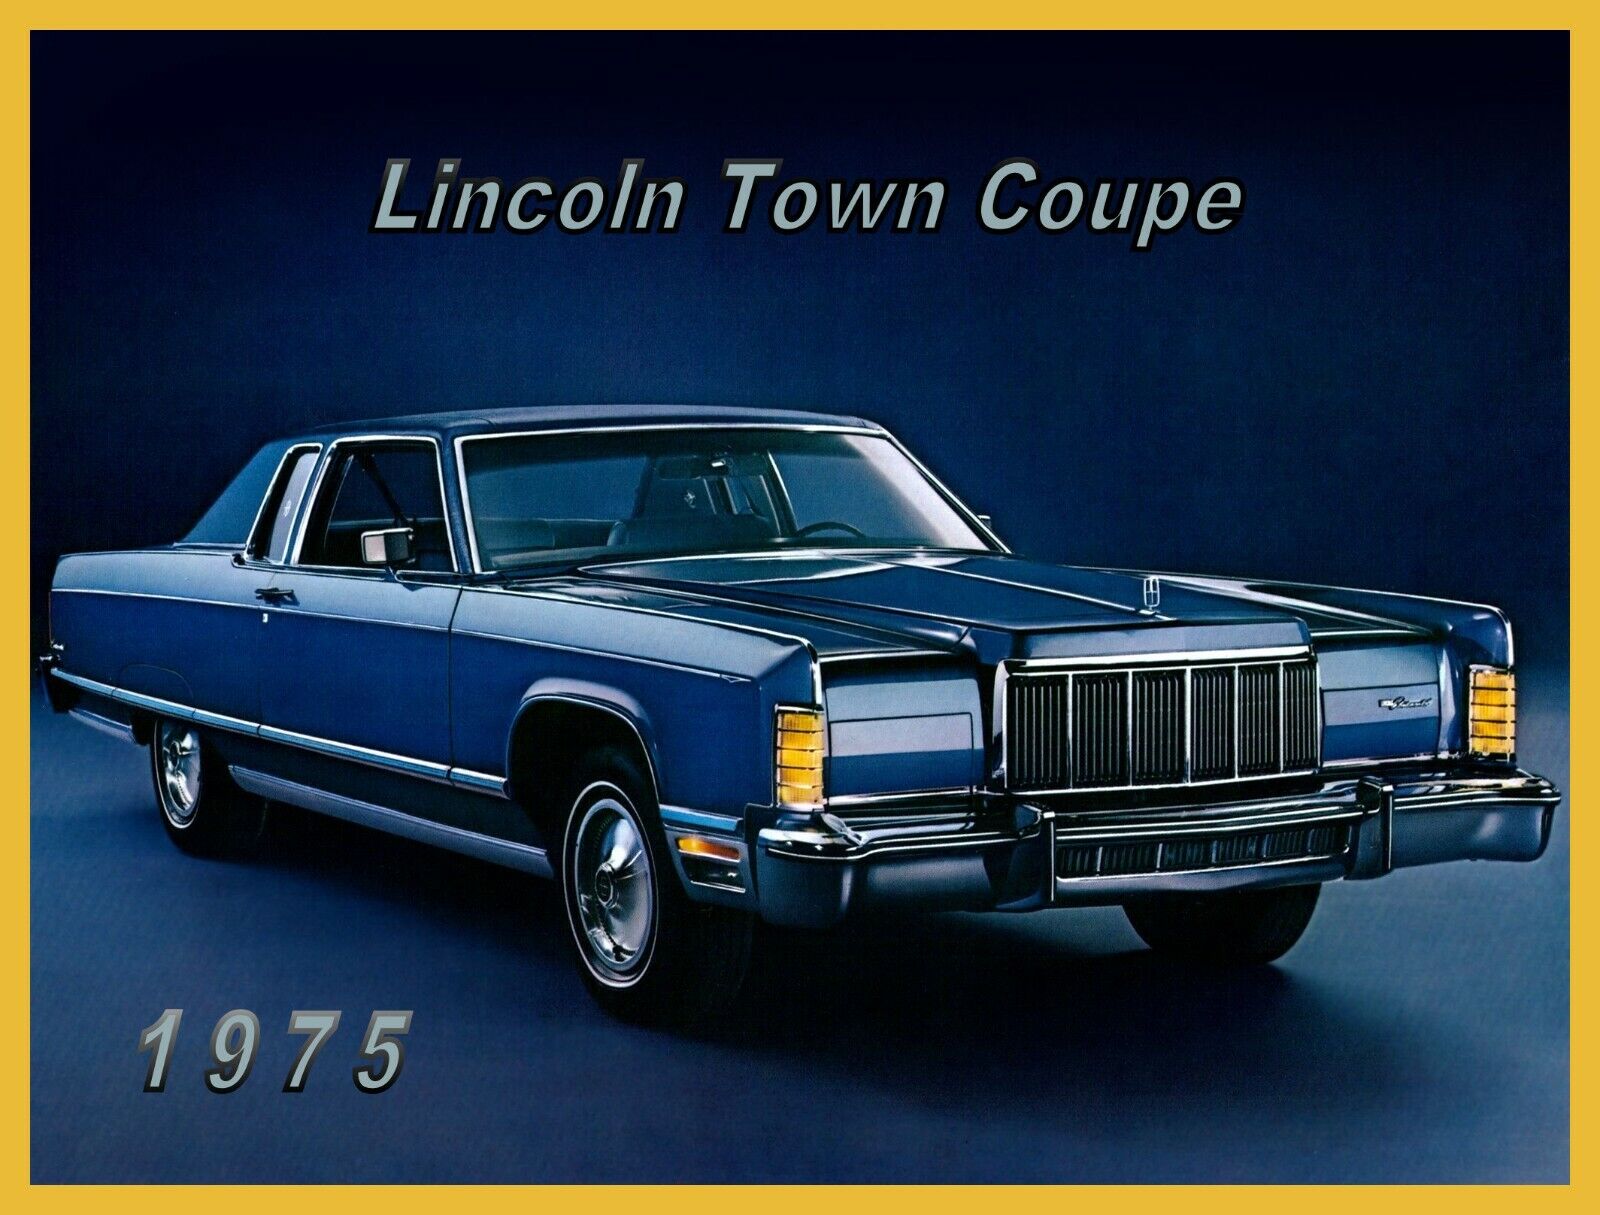 1975 Lincoln Continental Town Coupe, Refrigerator Magnet, 42 MIL 